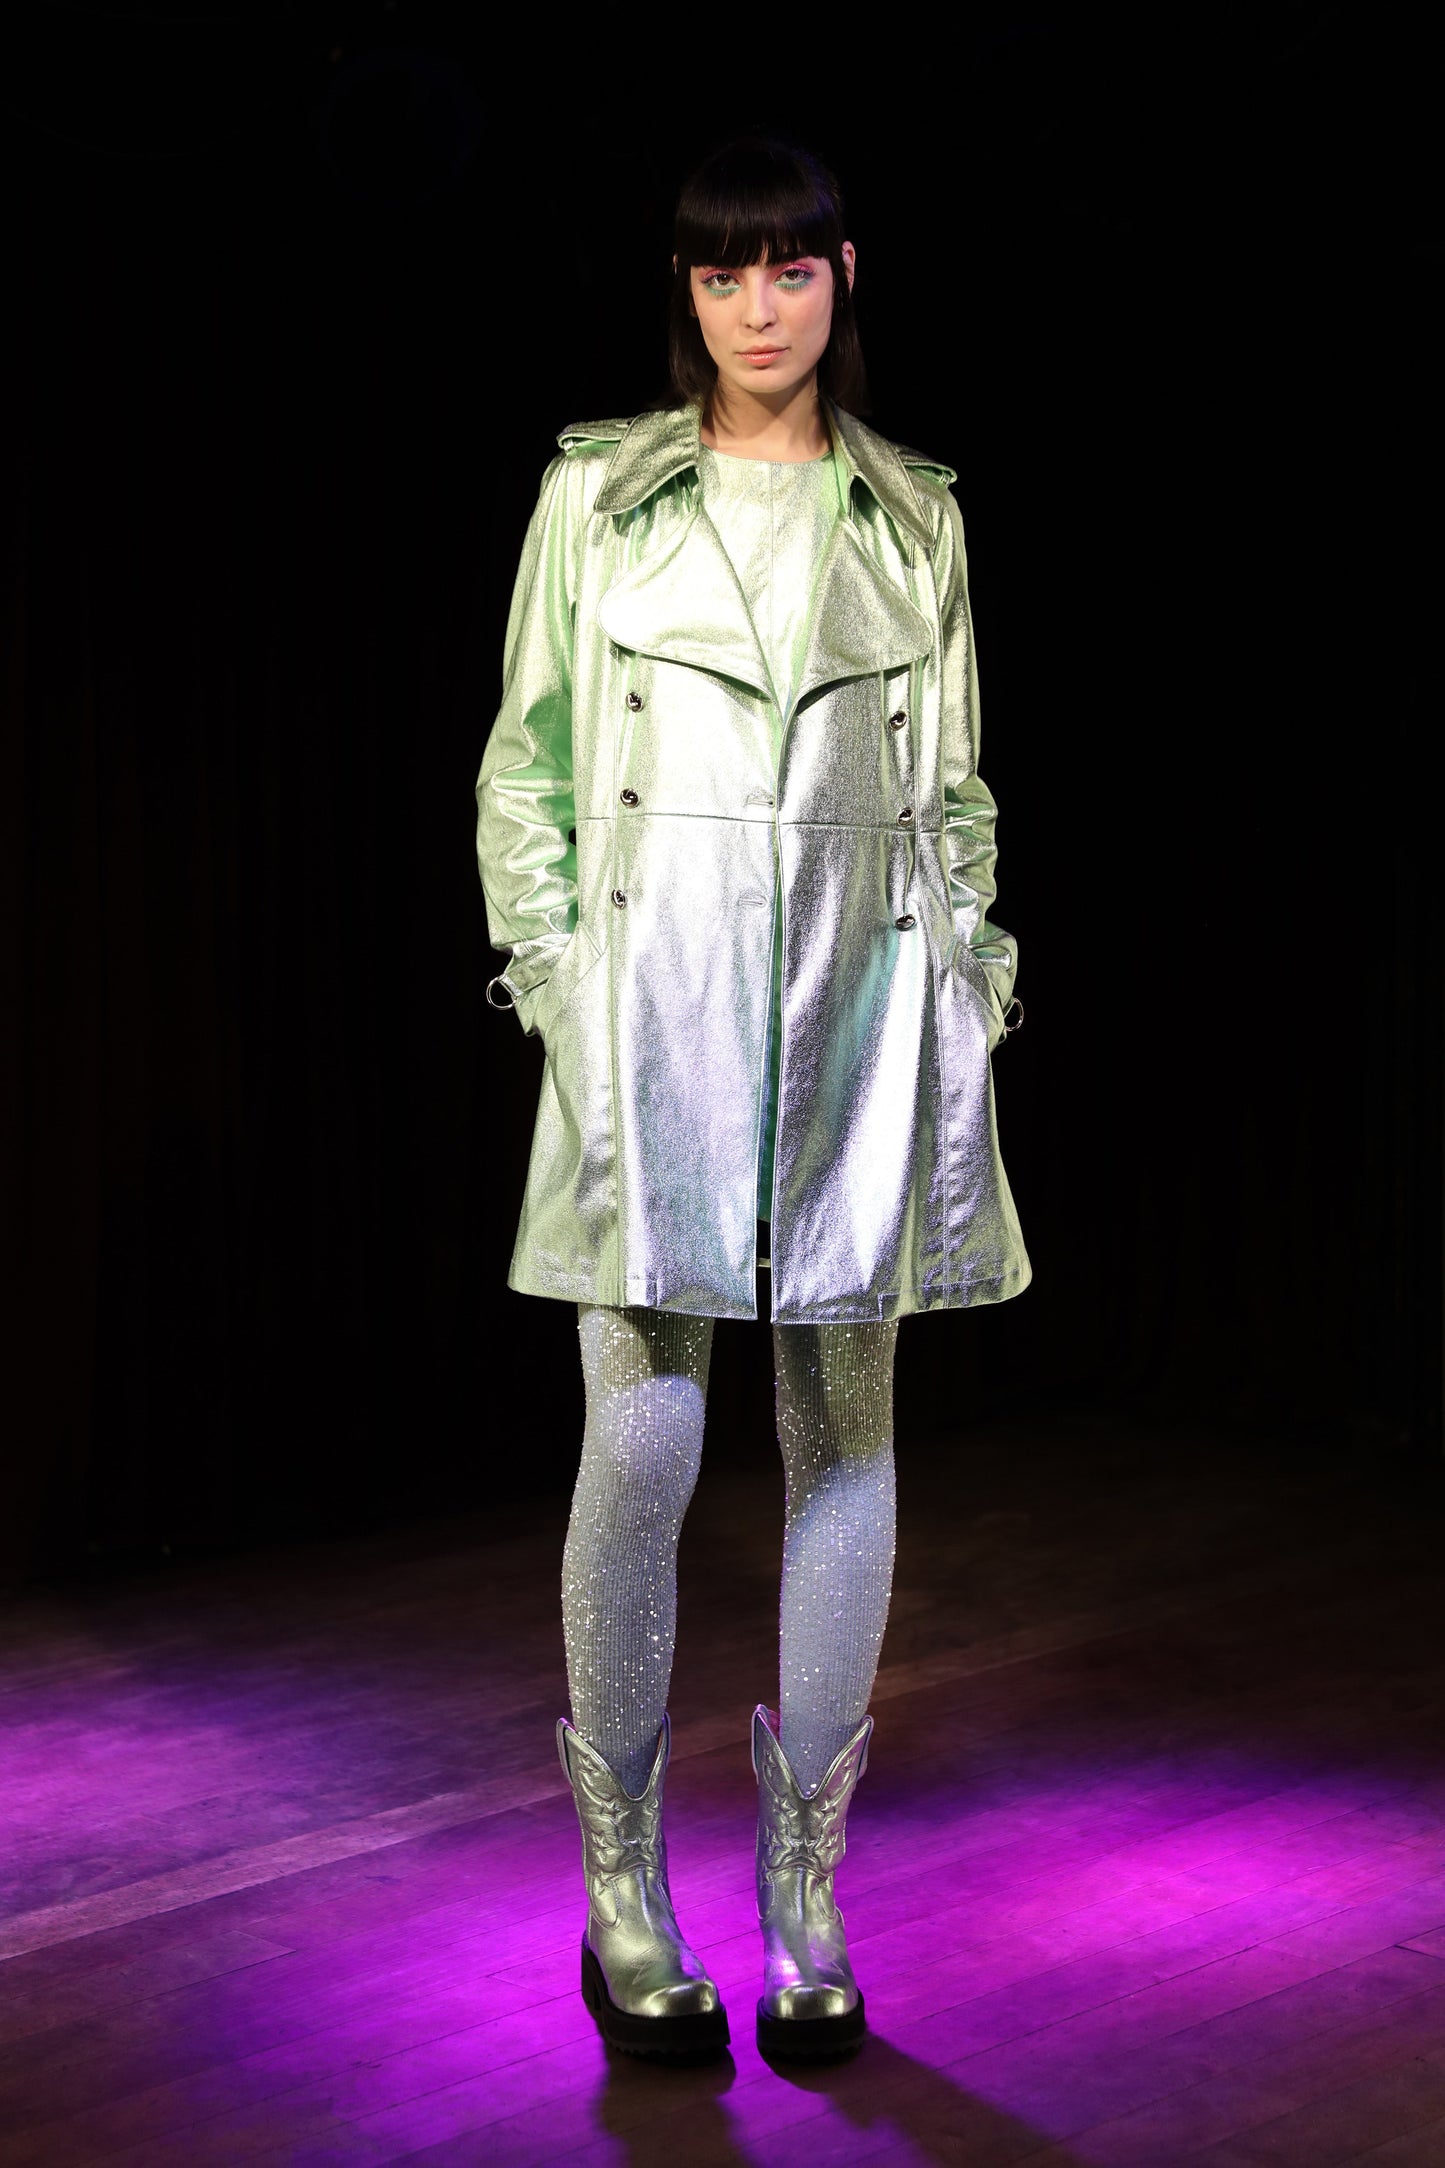 Peppermint Metallic Coat is a mid-length with a large collar and long sleeves with buckle cuffs